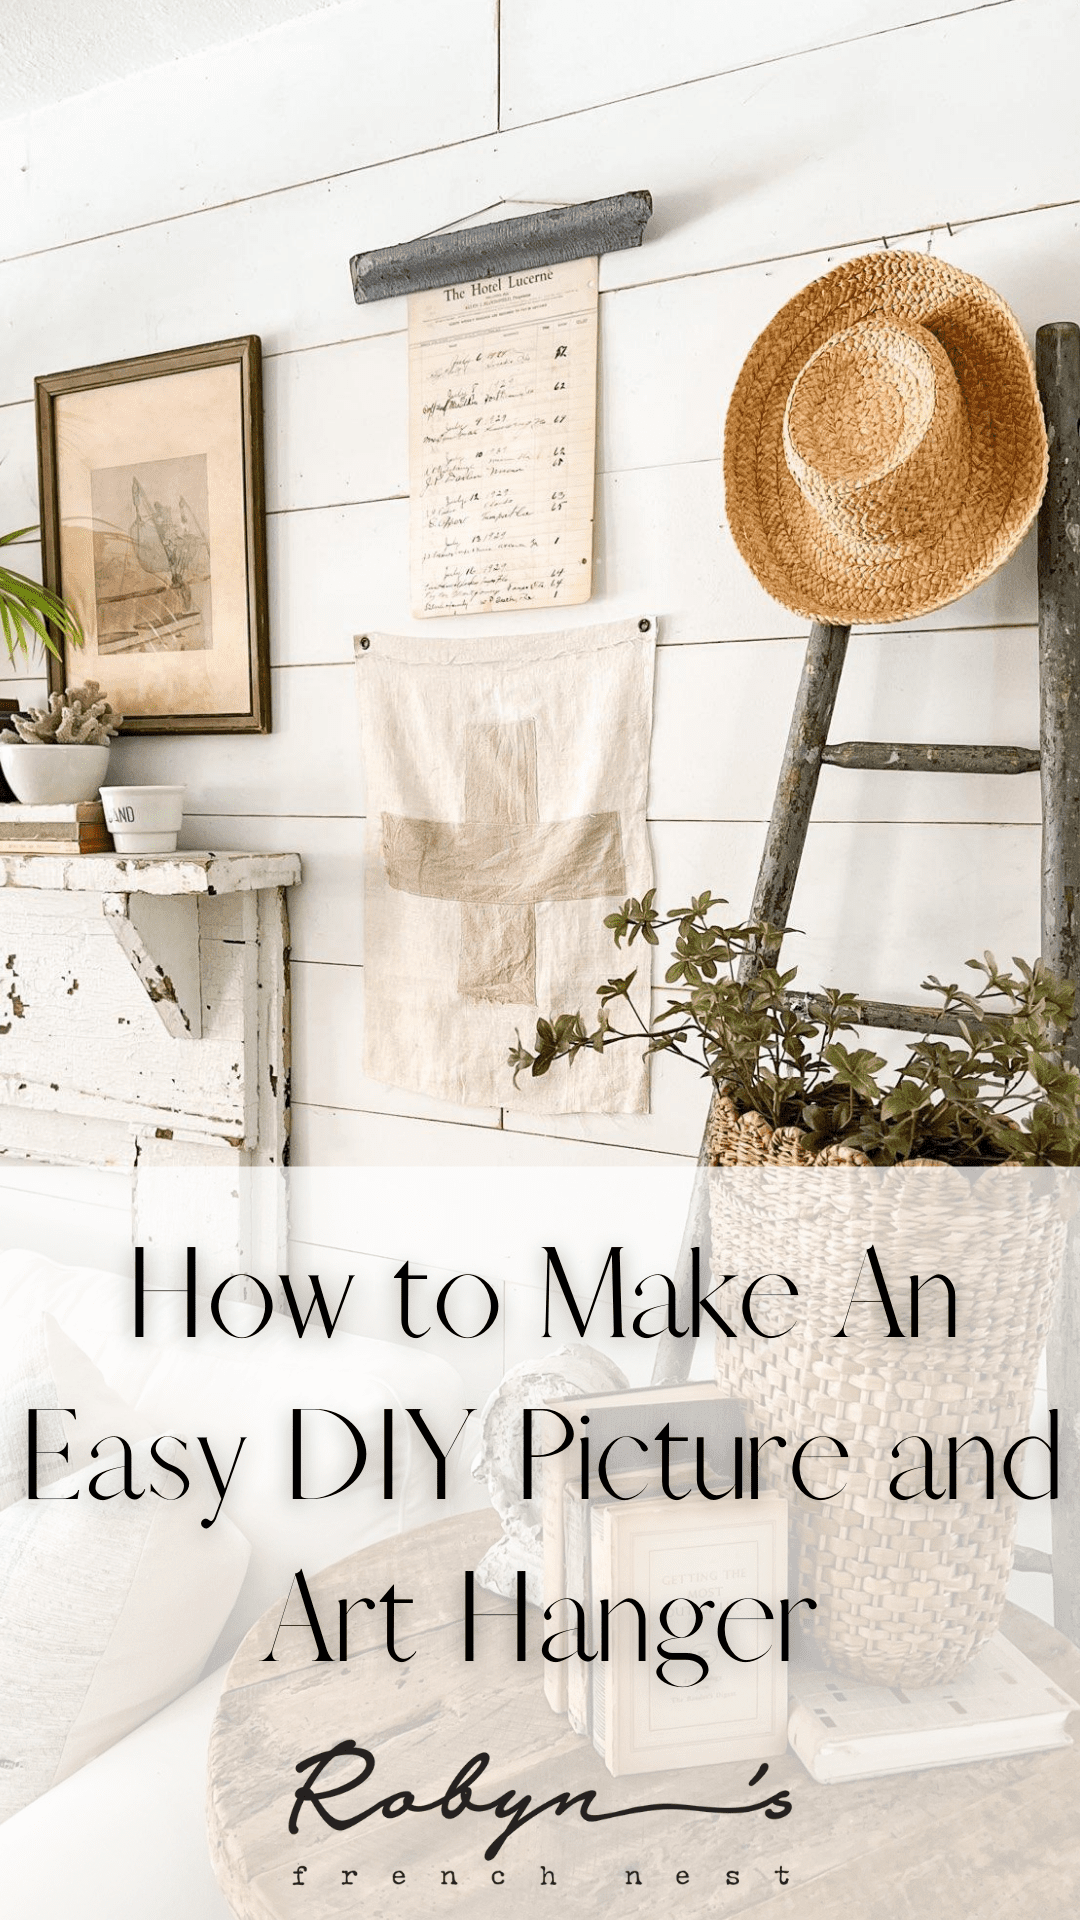 How to Make a Simple DIY Poster and Art Hanger